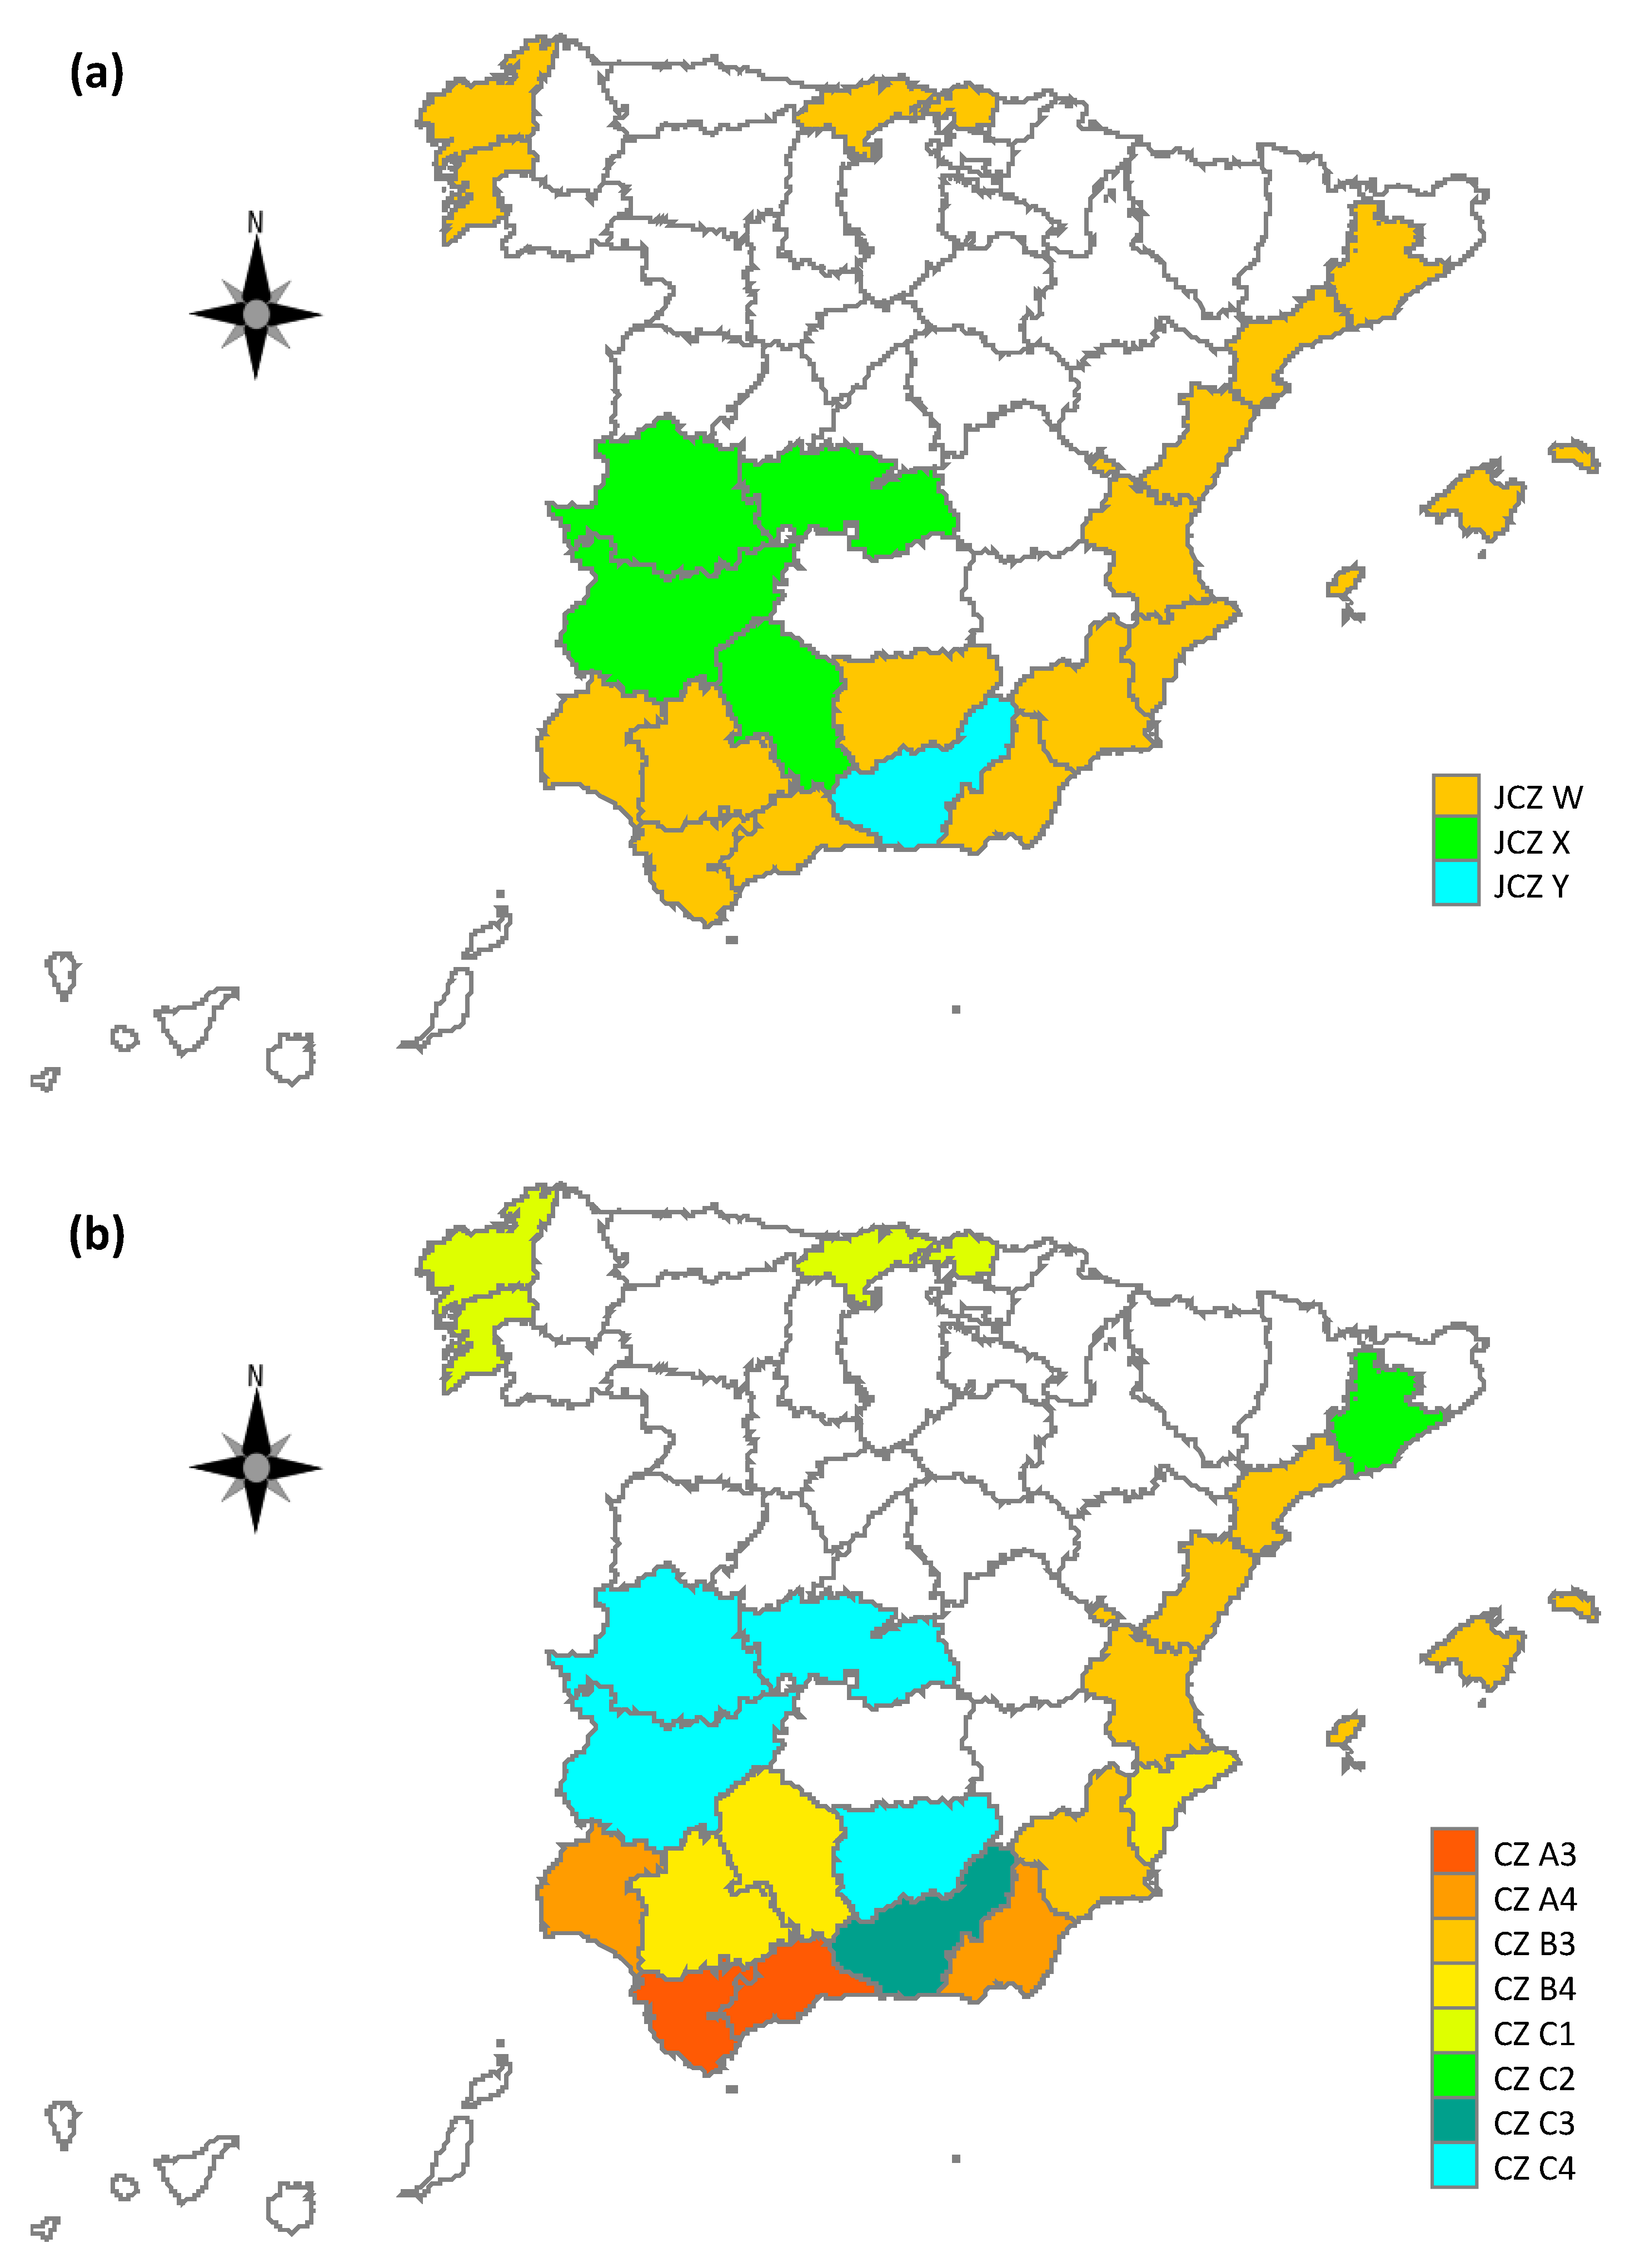 Applied Sciences Free Full Text Energy Renovation Of Residential Buildings In Hot And Temperate Mediterranean Zones Using Optimized Thermal Envelope Insulation Thicknesses The Case Of Spain Html